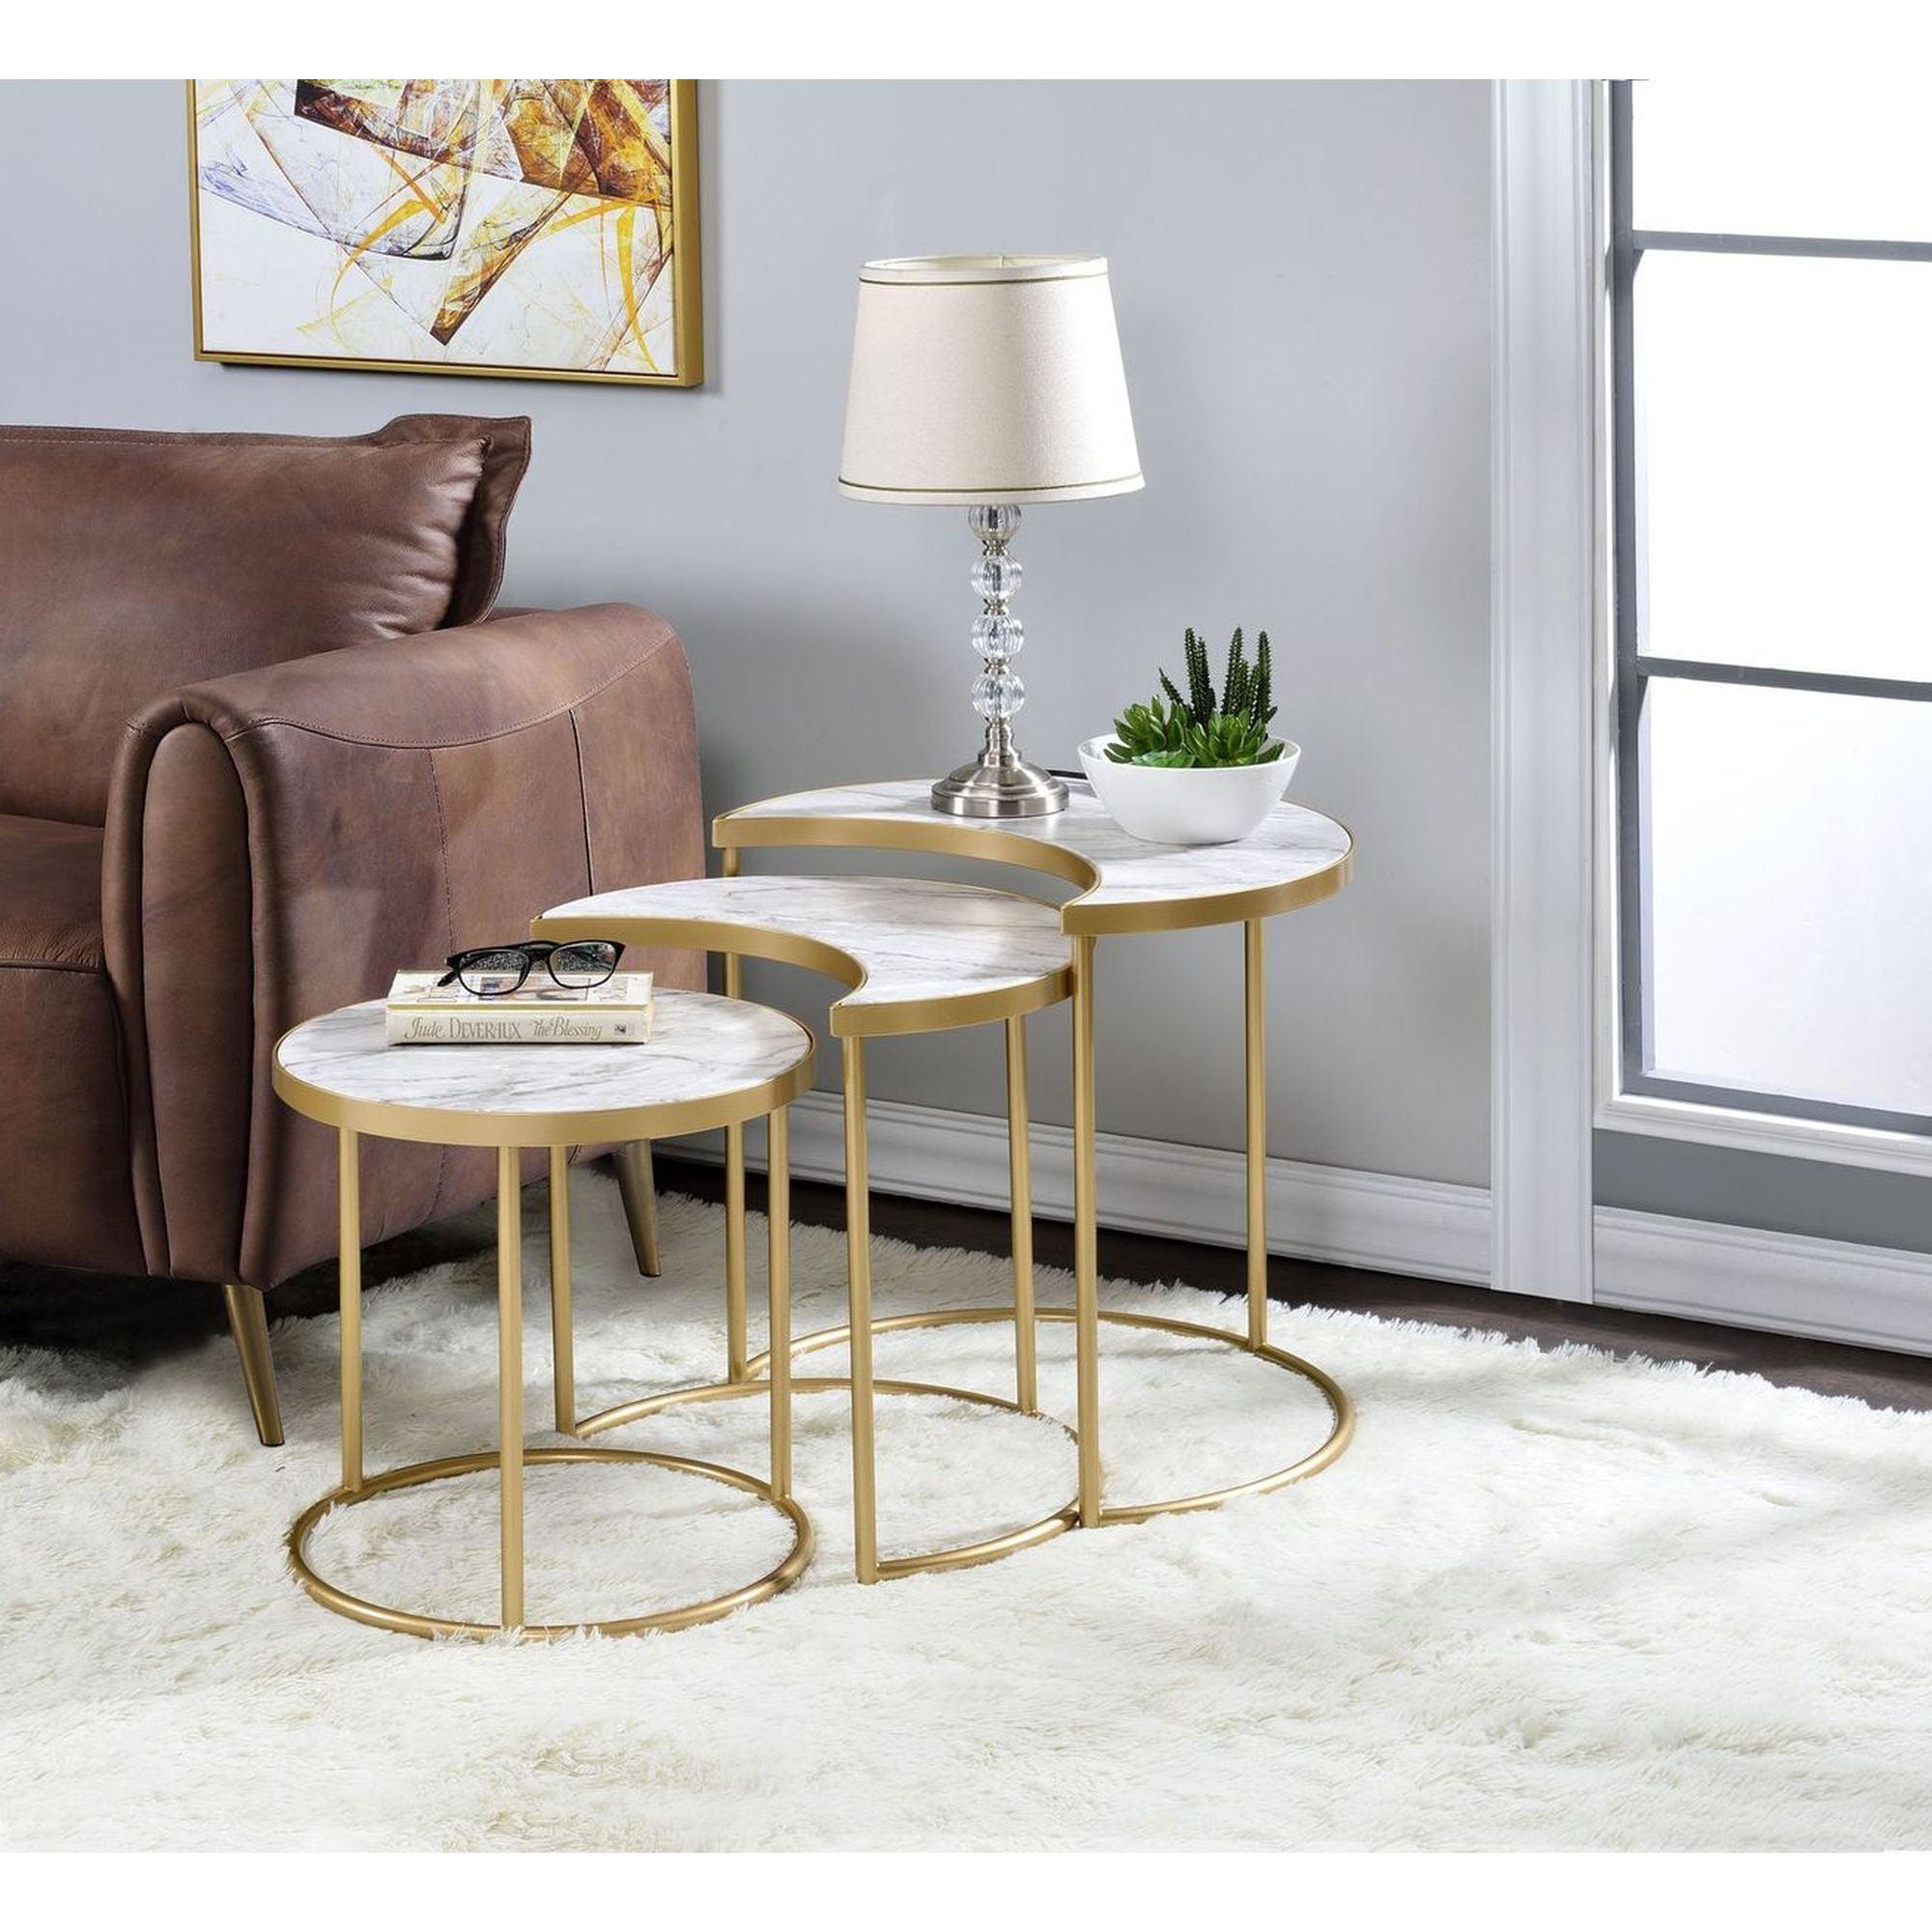 24" Round Wood and Metal Nesting Coffee Table Set